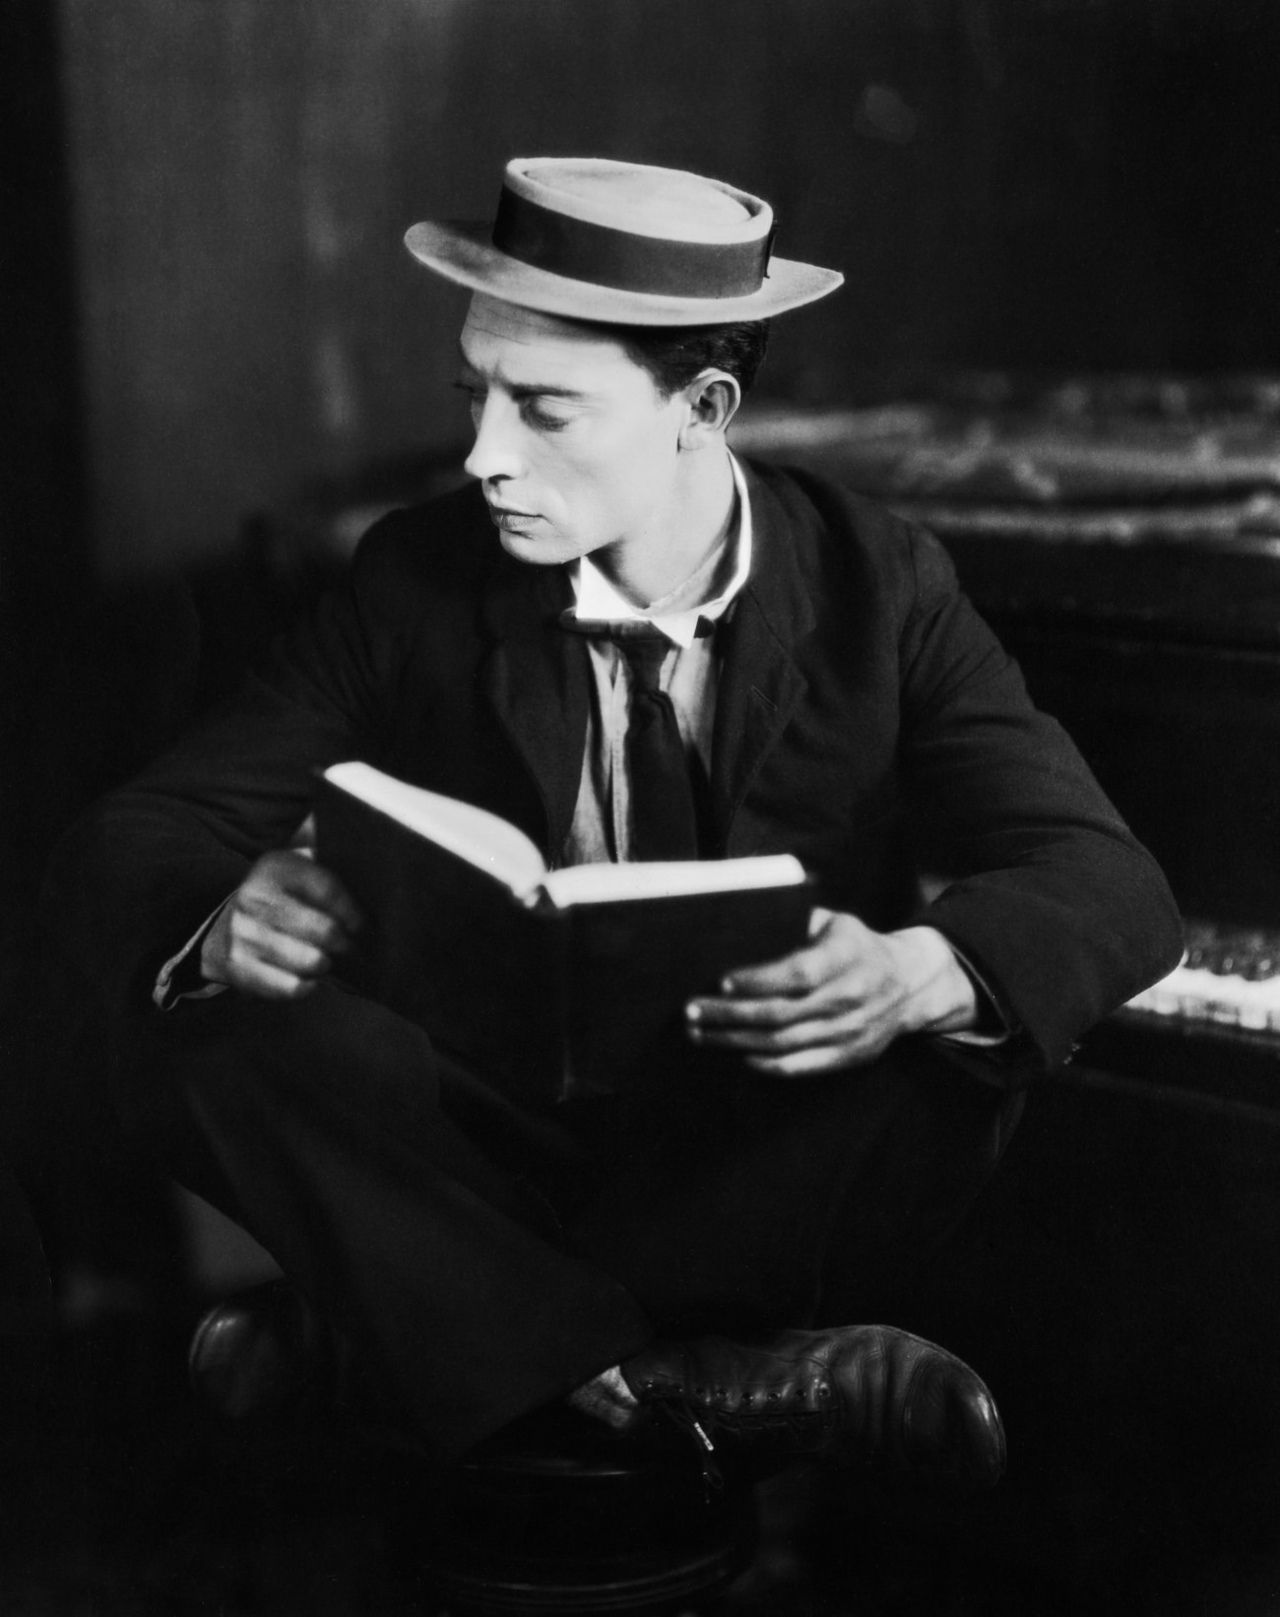 Buster Keaton reading. When, at six months, he tumbled down a flight of stairs unharmed, he was given the name “Buster” by Harry. Silent movie, Comedians, Actors